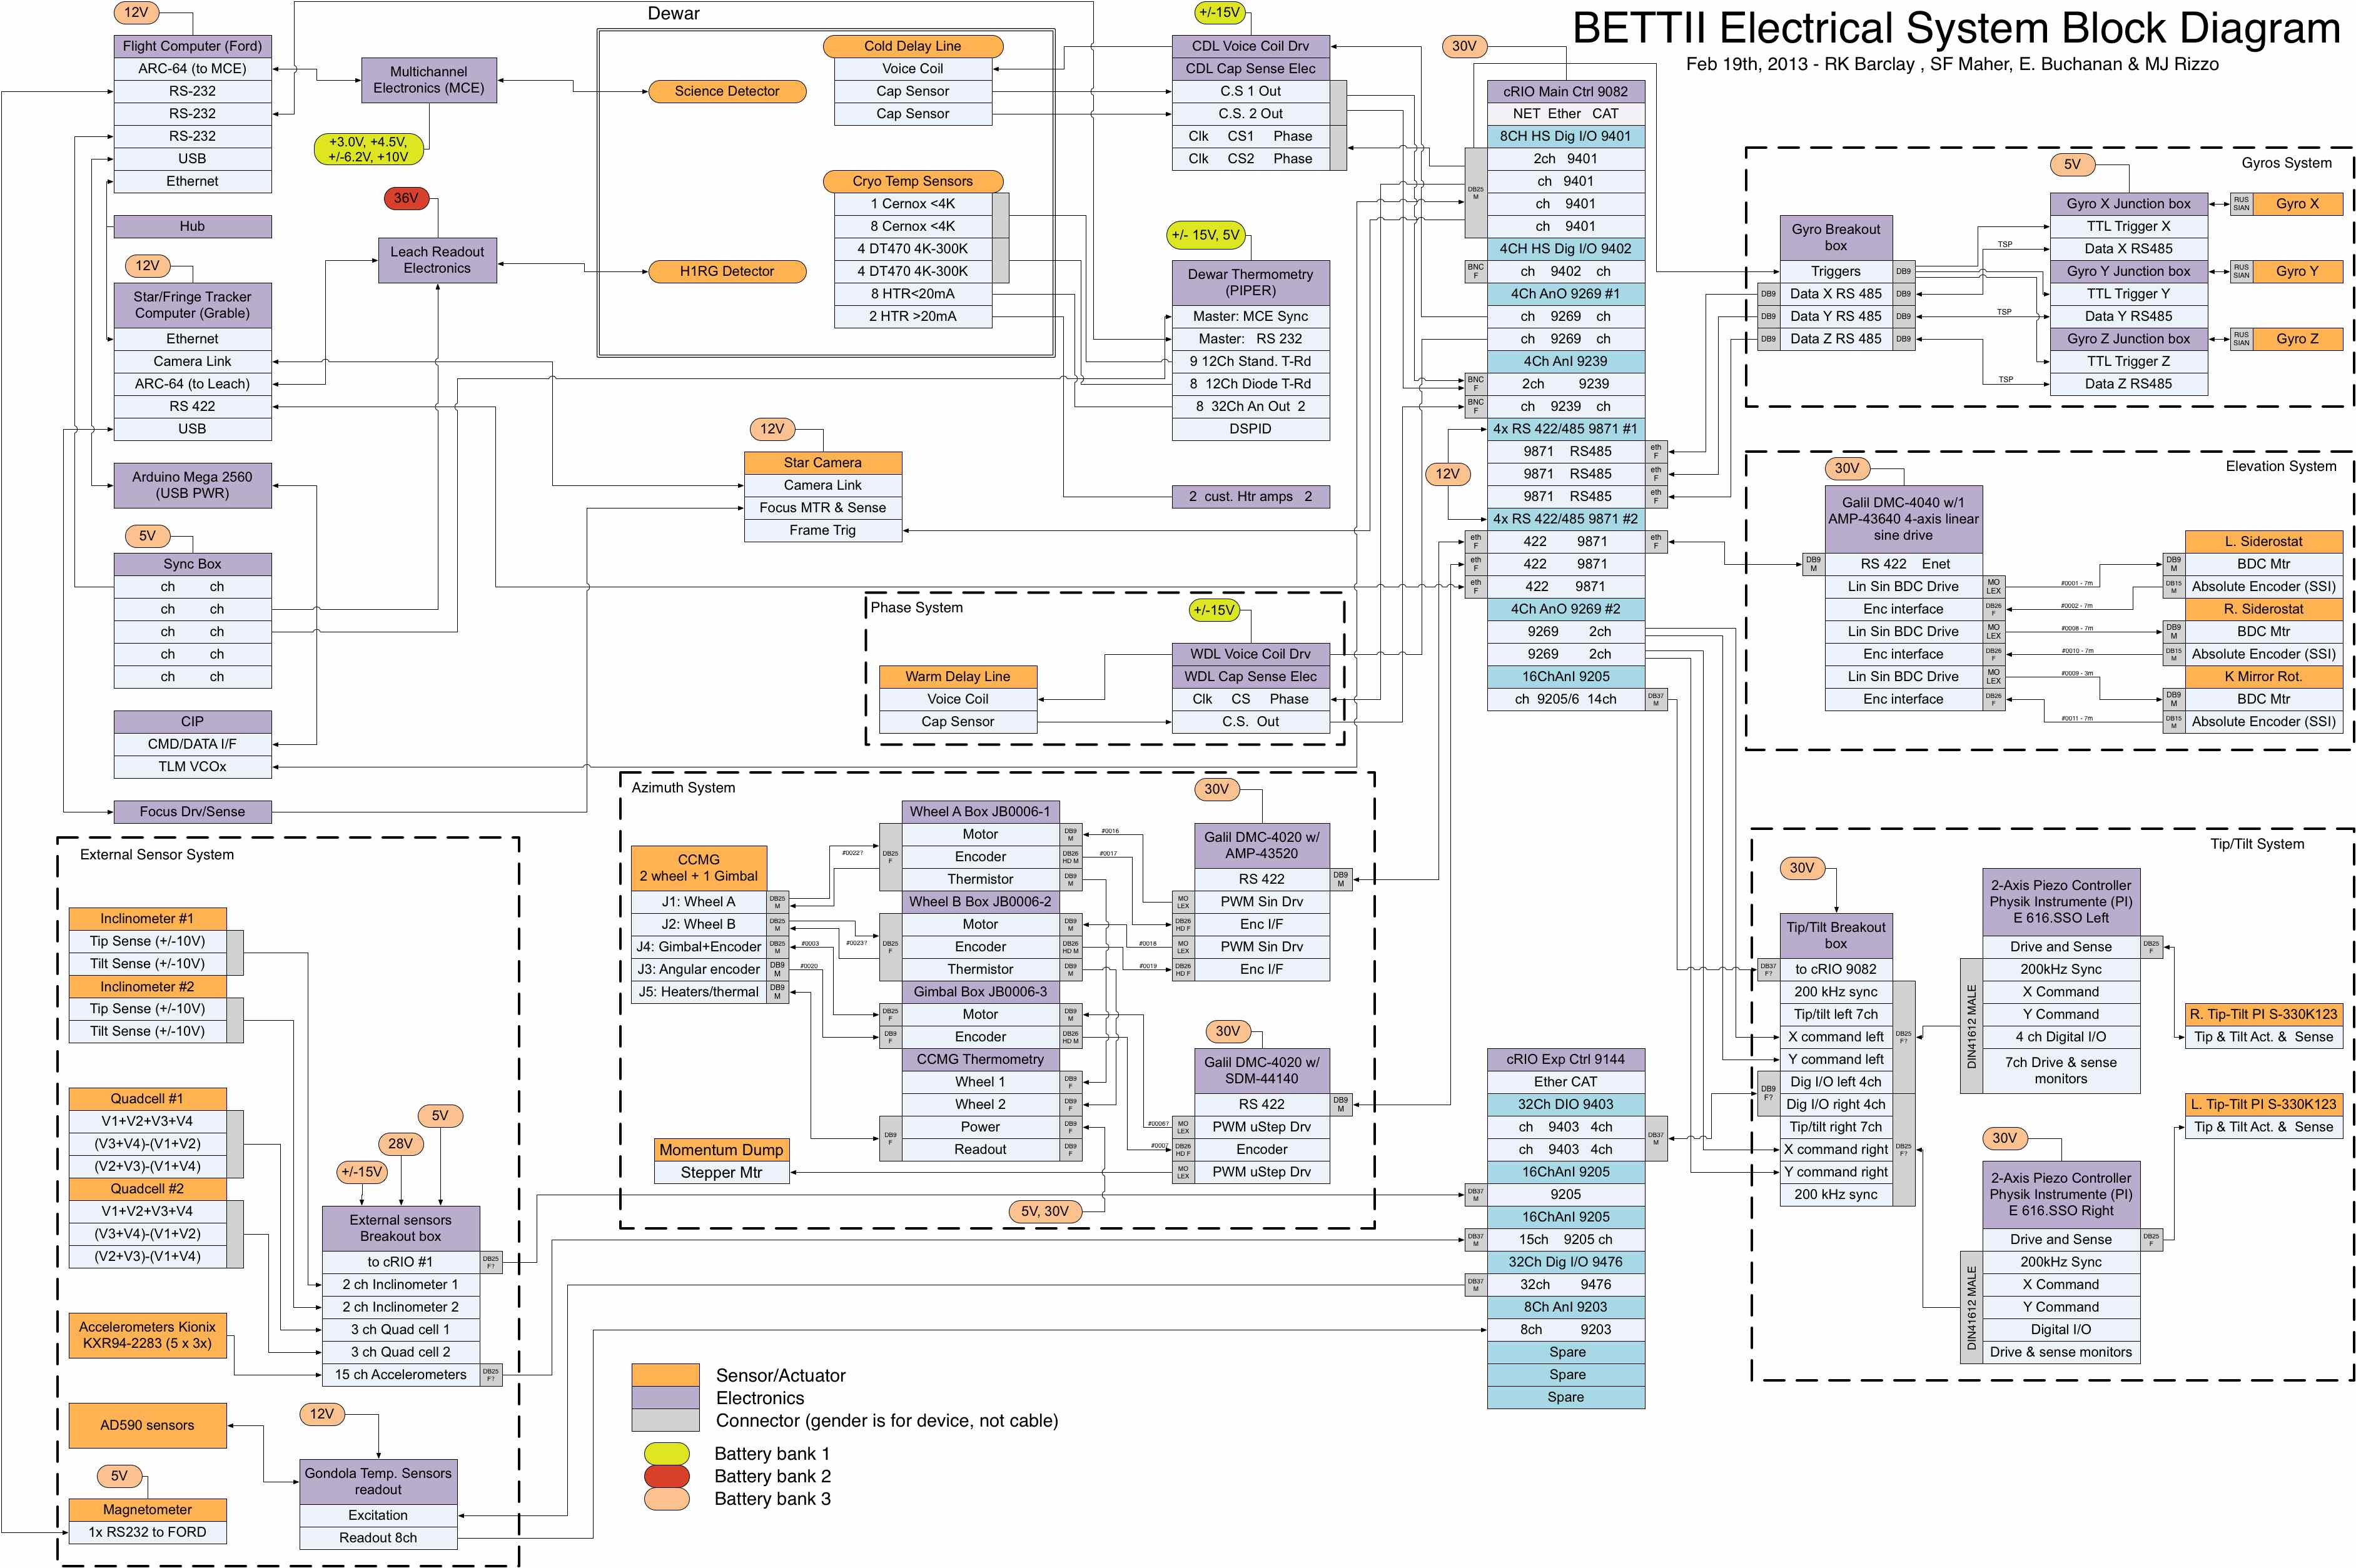 Block diagram of the whole BETTII system, including all the cables and most connectors